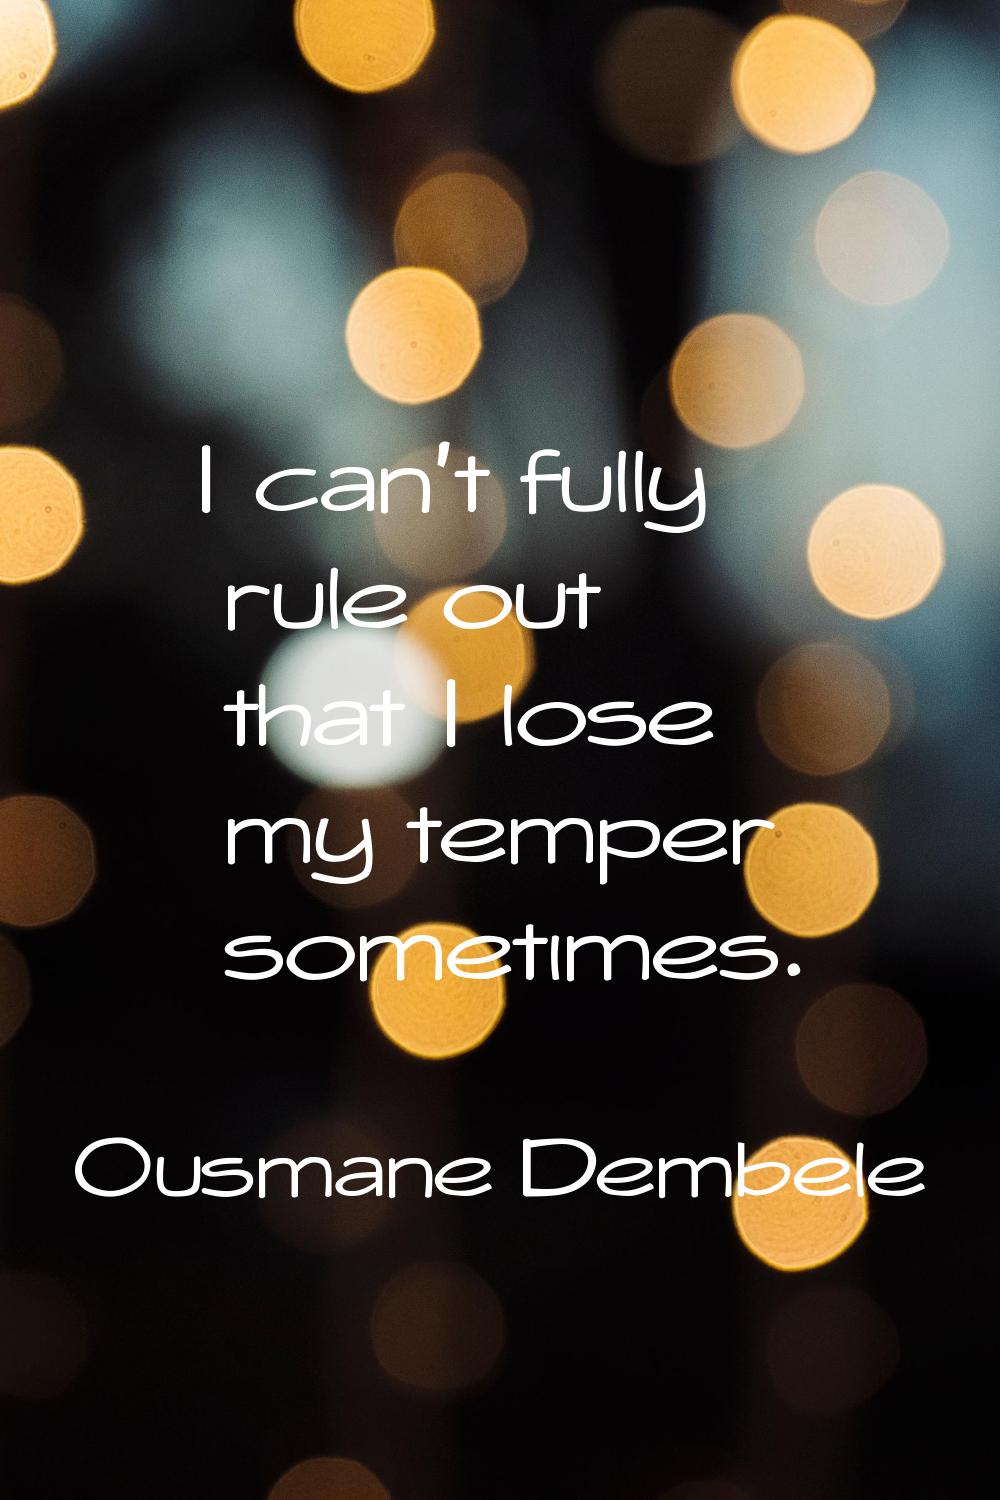 I can't fully rule out that I lose my temper sometimes.